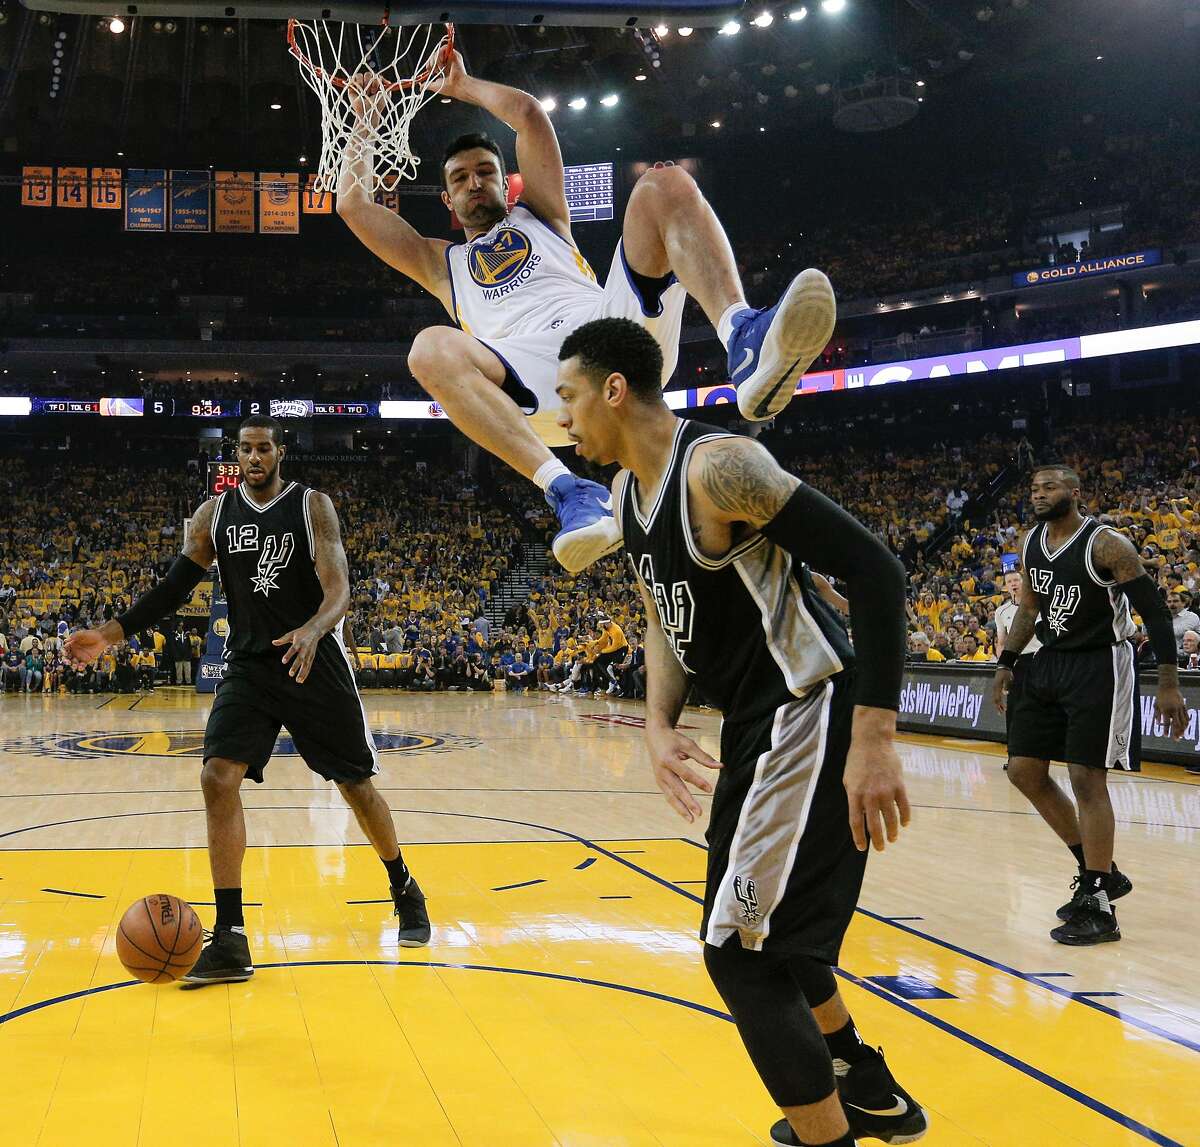 Golden State Warriors' Zaza Pachulia hangs on the rim during Game 2 of the 2017 NBA Playoffs Western Conference Finals at Oracle Arena on Tuesday, May 16, 2017 in Oakland, Calif.